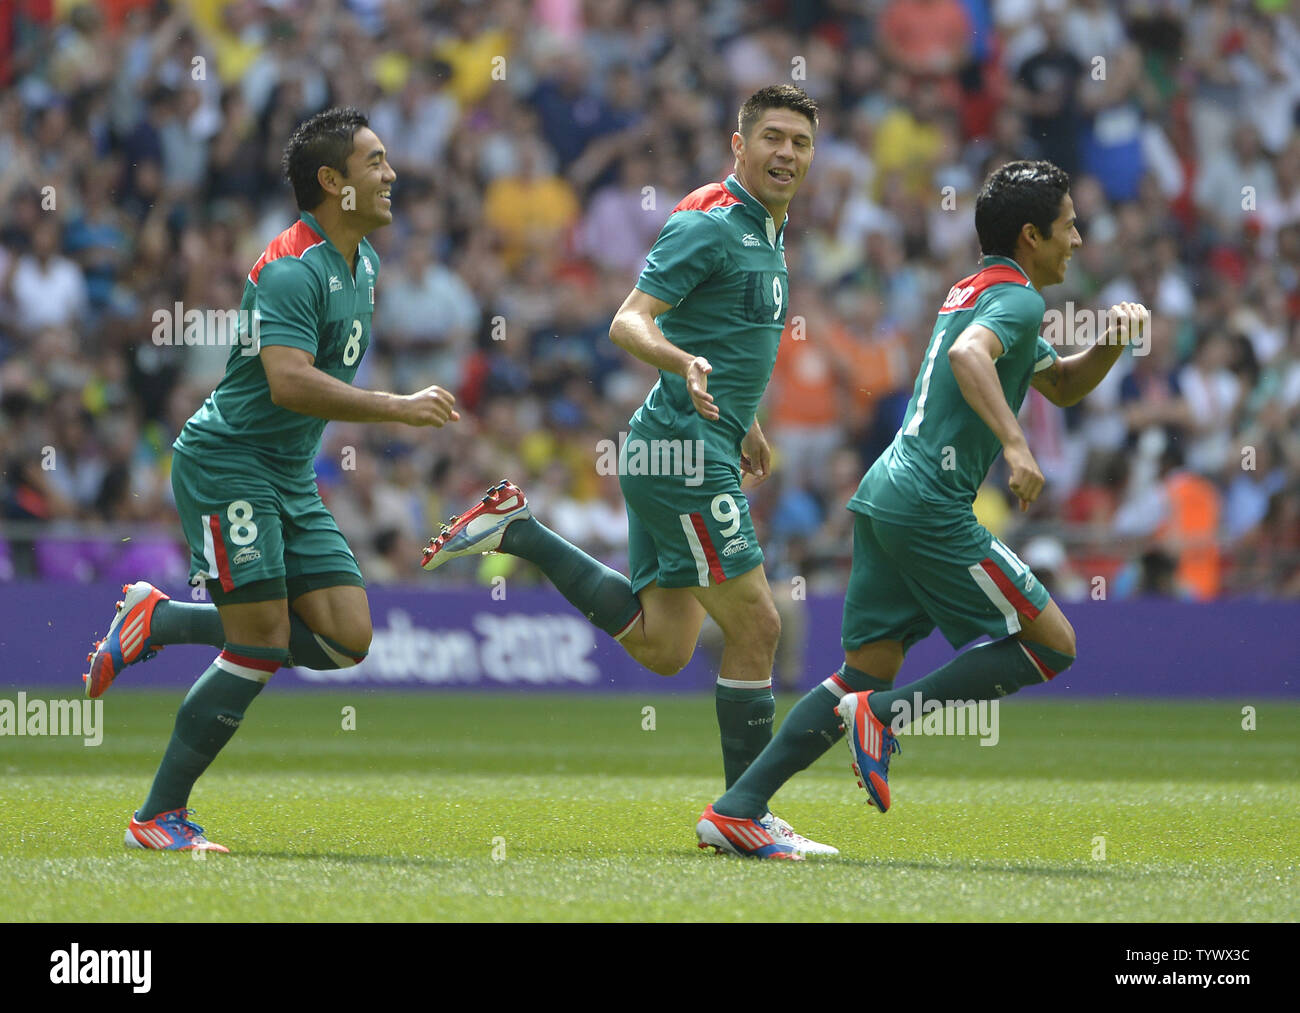 Marco Fabian (L-R) Oribe Peralta and Javier Aquino of Mexico celebrate Paralta's goal during the first half of the Gold Medal Football Match against Brazil at the London 2012 Summer Olympics on August 11, 2012 at Wembley Stadium, London.      UPI/Brian Kersey Stock Photo